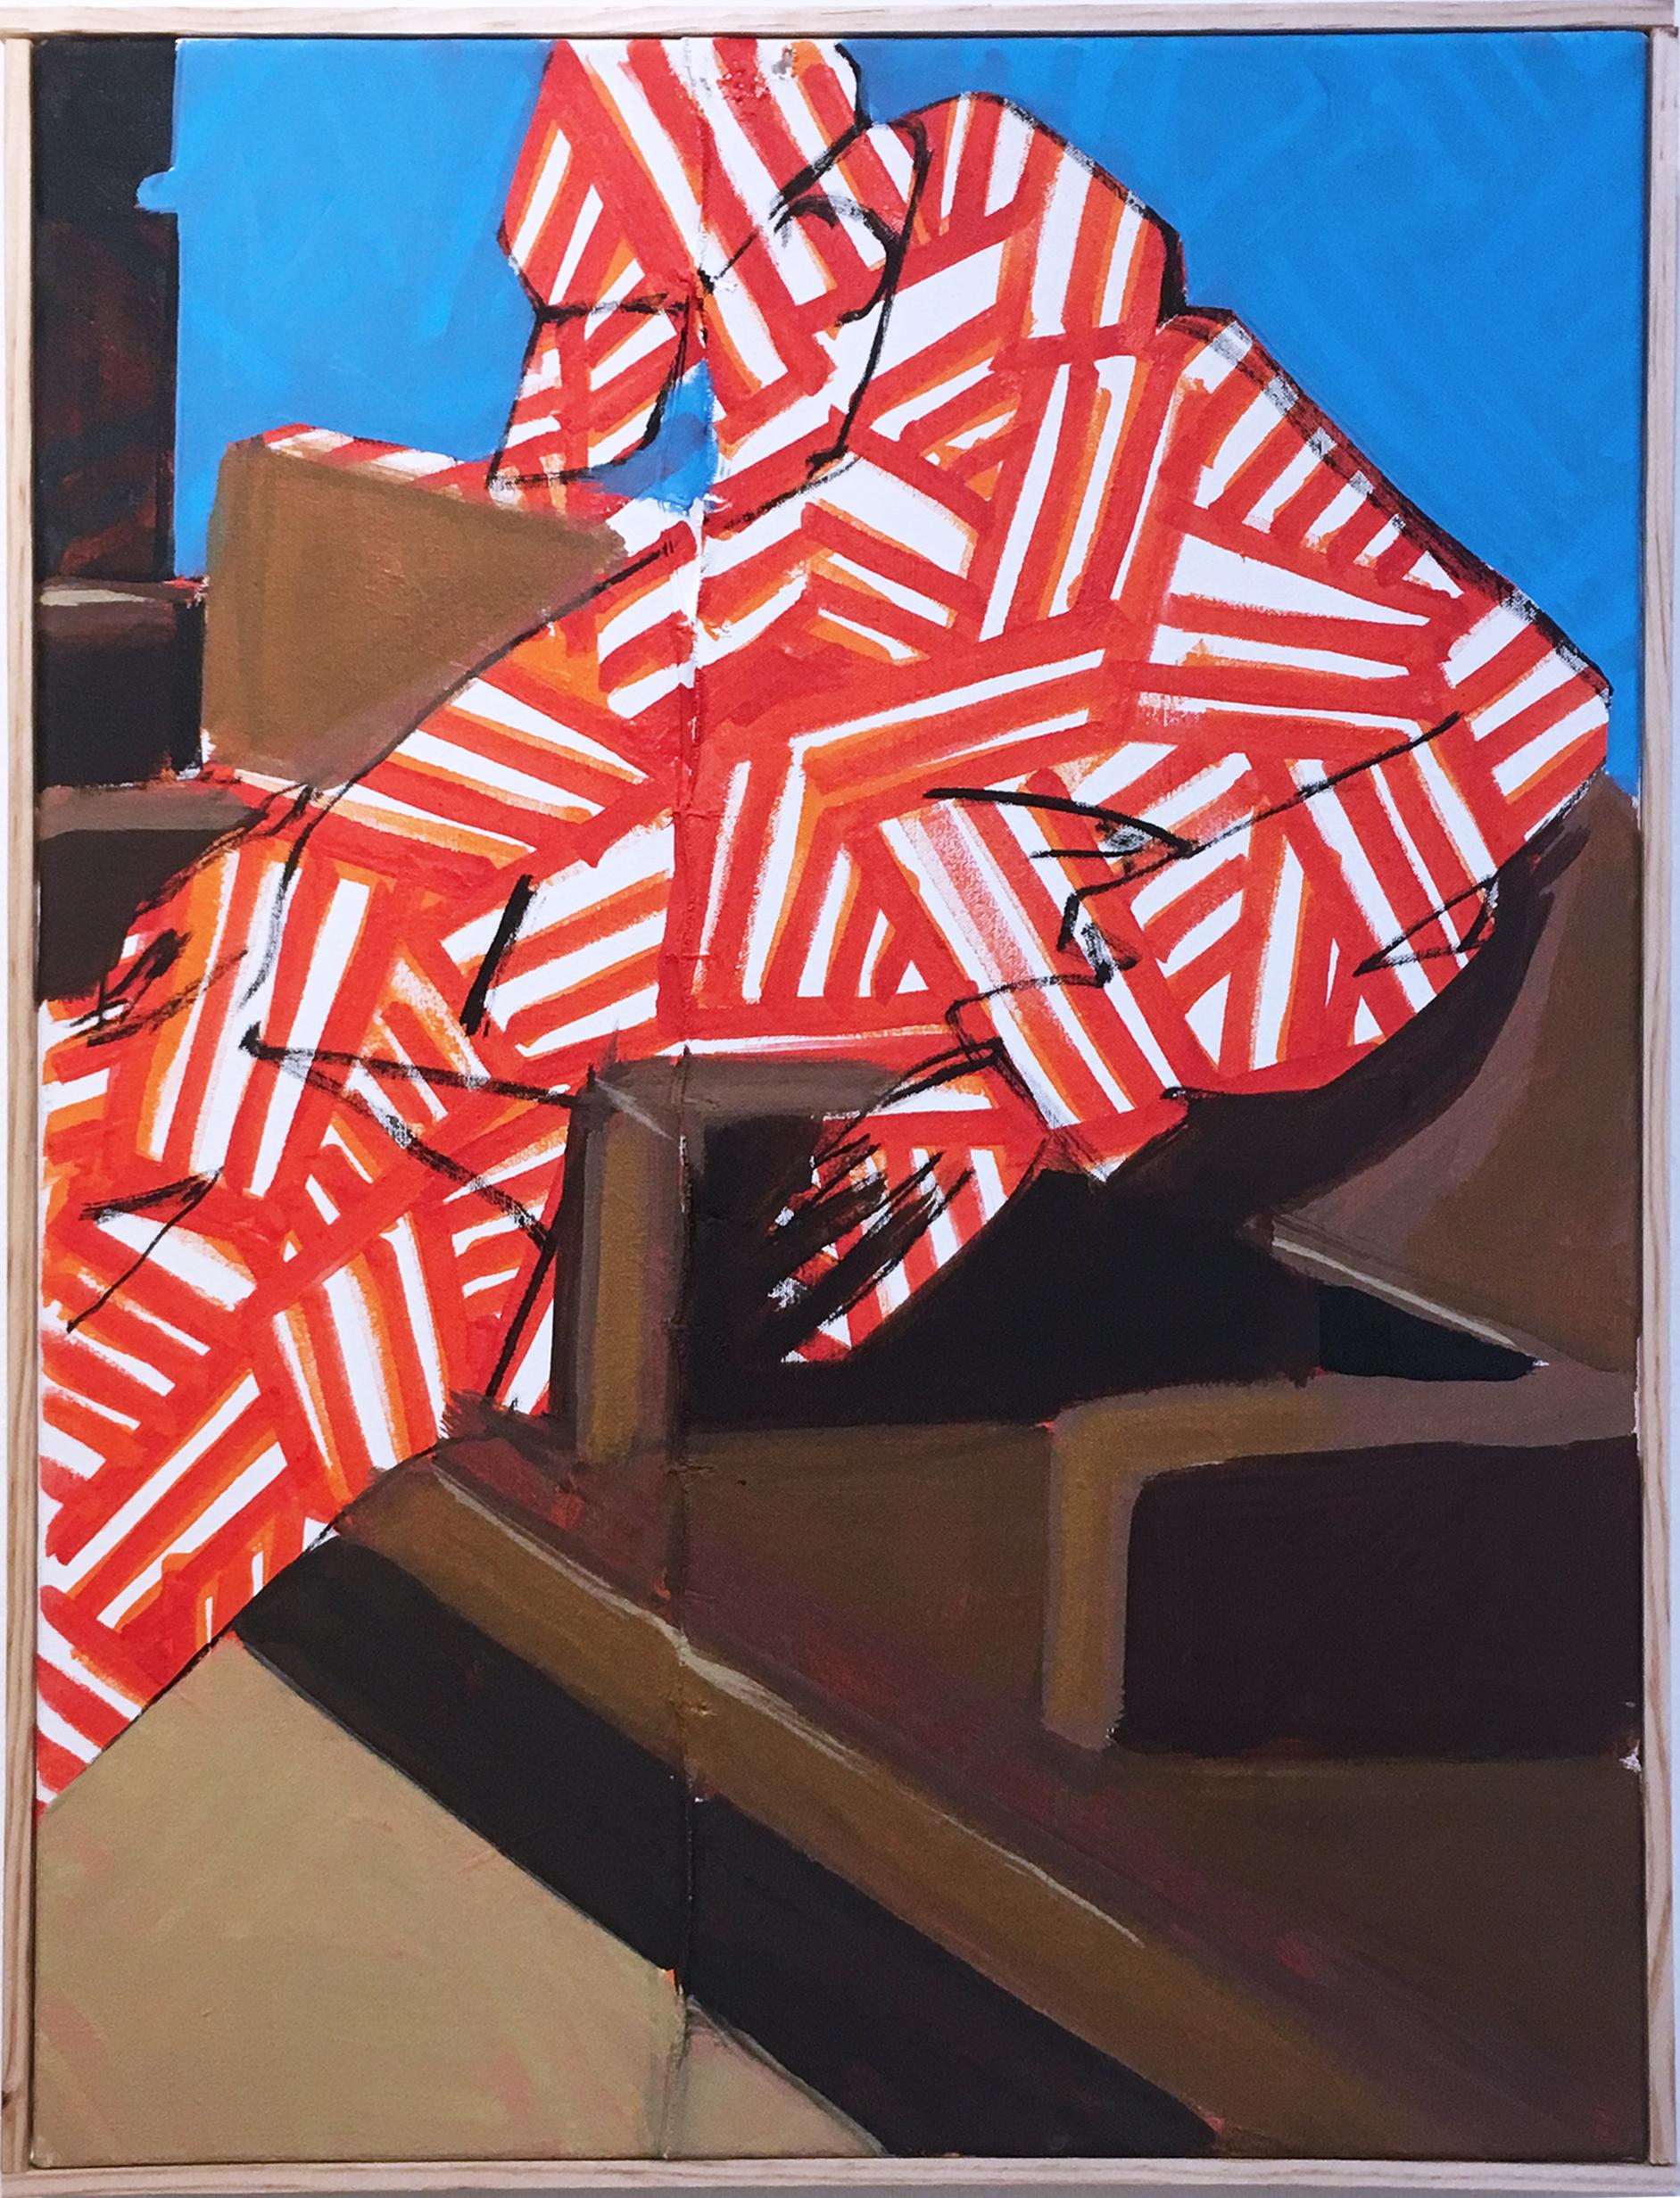 BlusterOne Figurative Painting - Now by street artist BLUSTERONE, figurative subway commuter with bold pattern